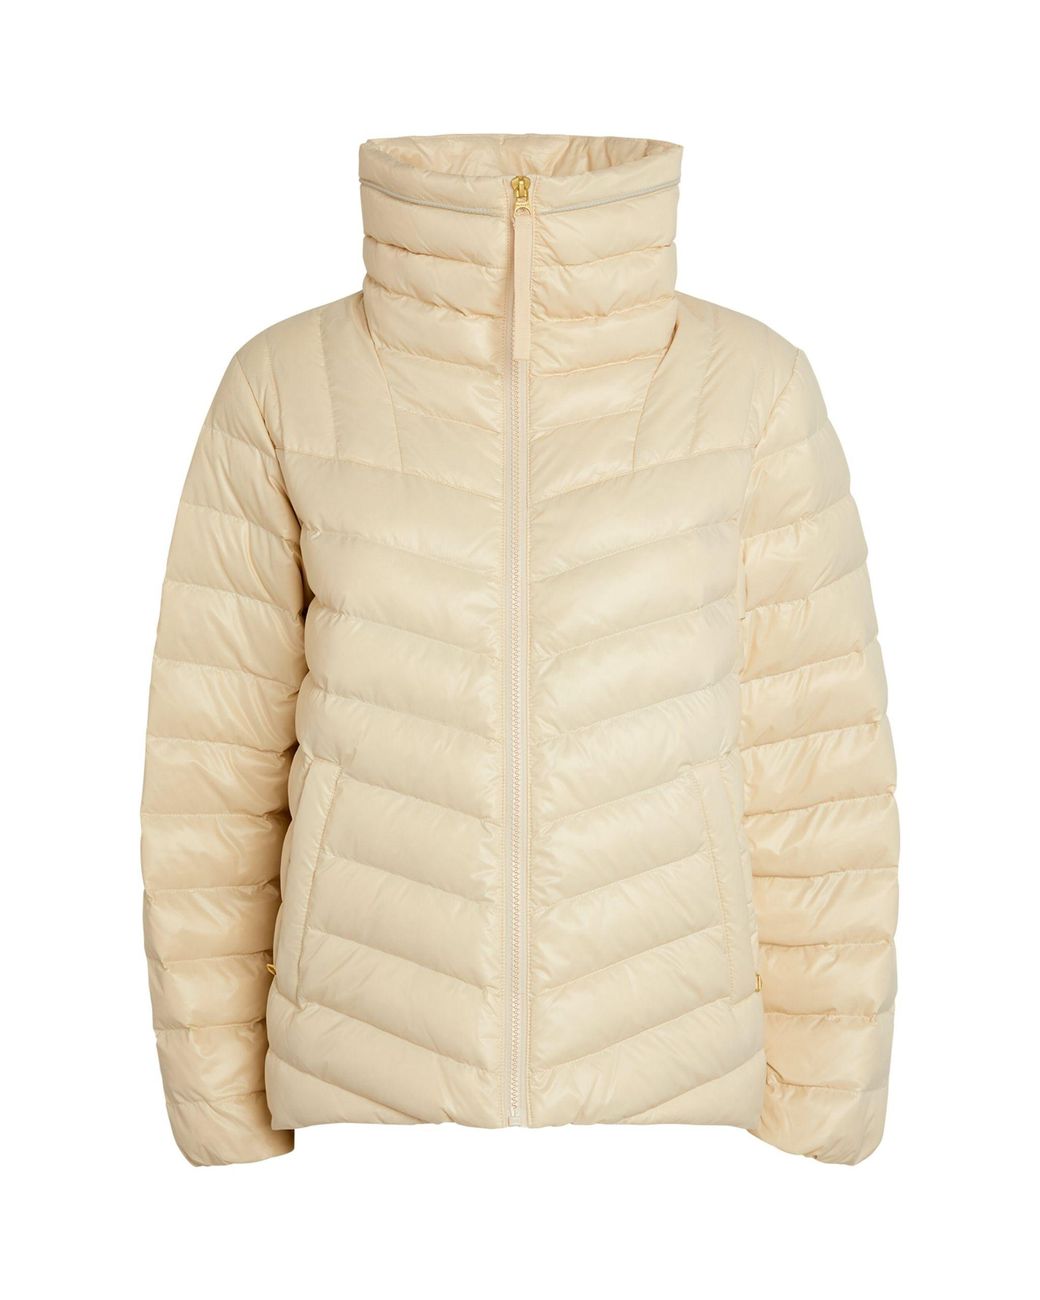 Varley Porter Puffer Jacket in Natural | Lyst